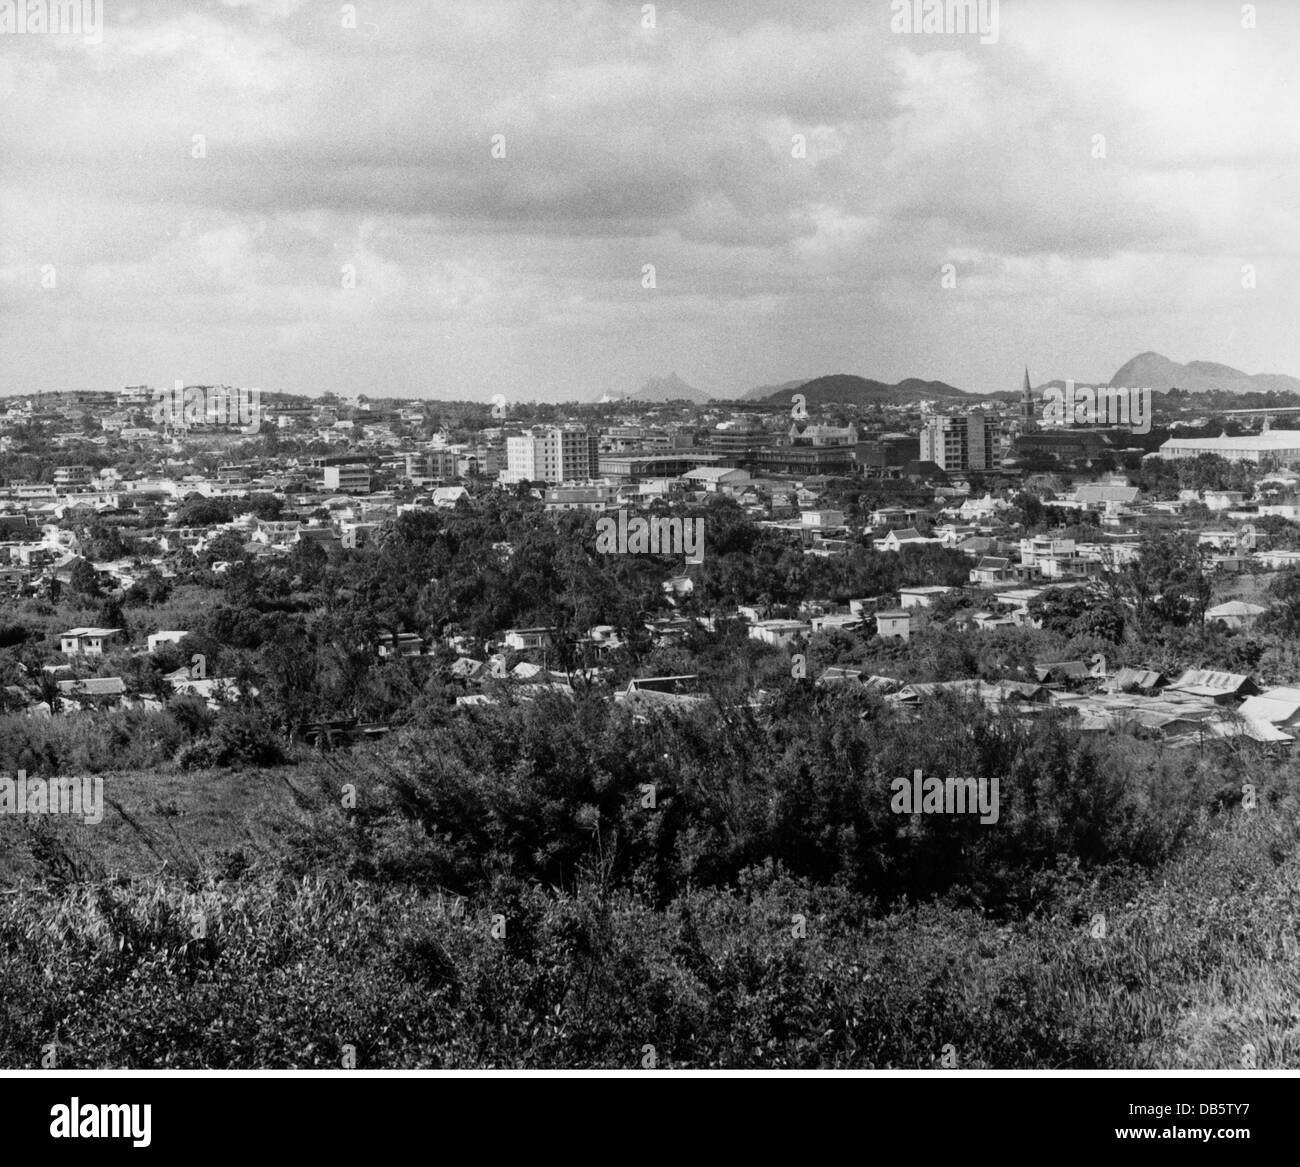 Geographie / Reisen, Mauritius, Curepipe, Stadtblick, 1960er, , Additional-Rights-Clearences-not available Stockfoto